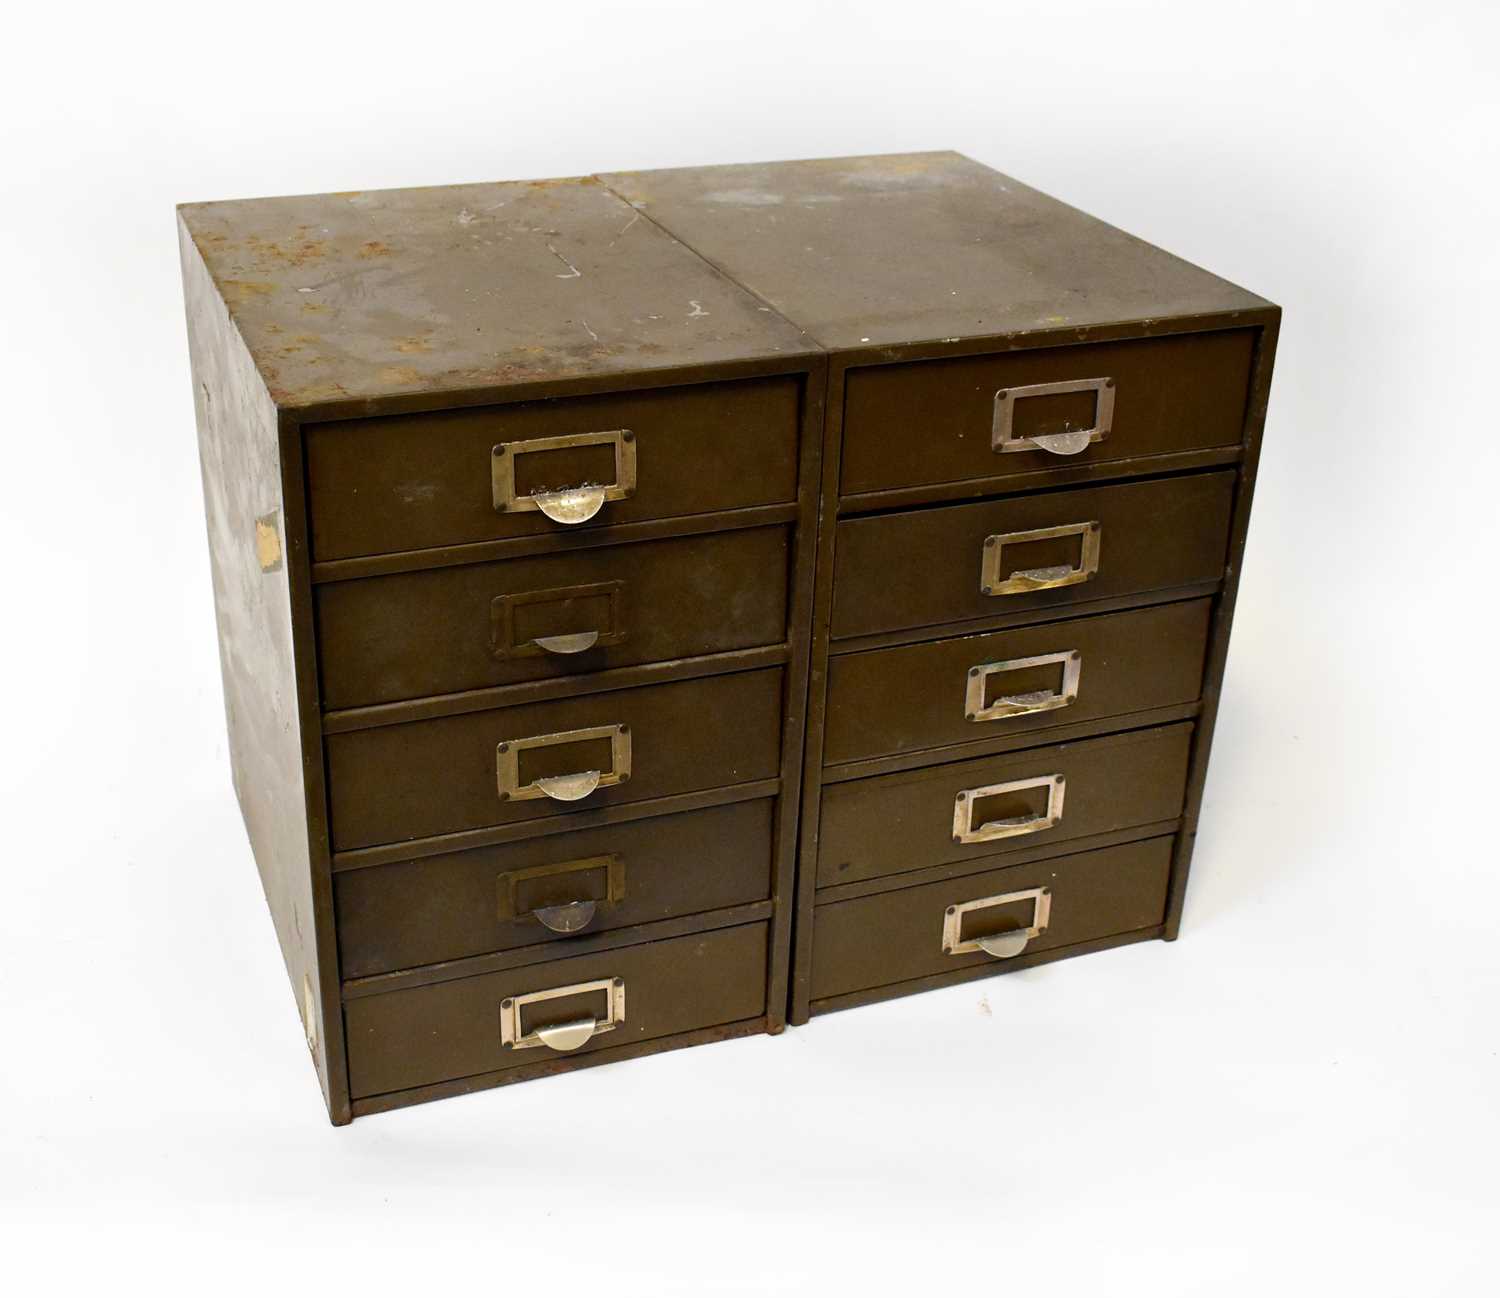 A pair of mid-20th century metal five-drawer filing cabinets of small proportions, 37.5 x 24 x